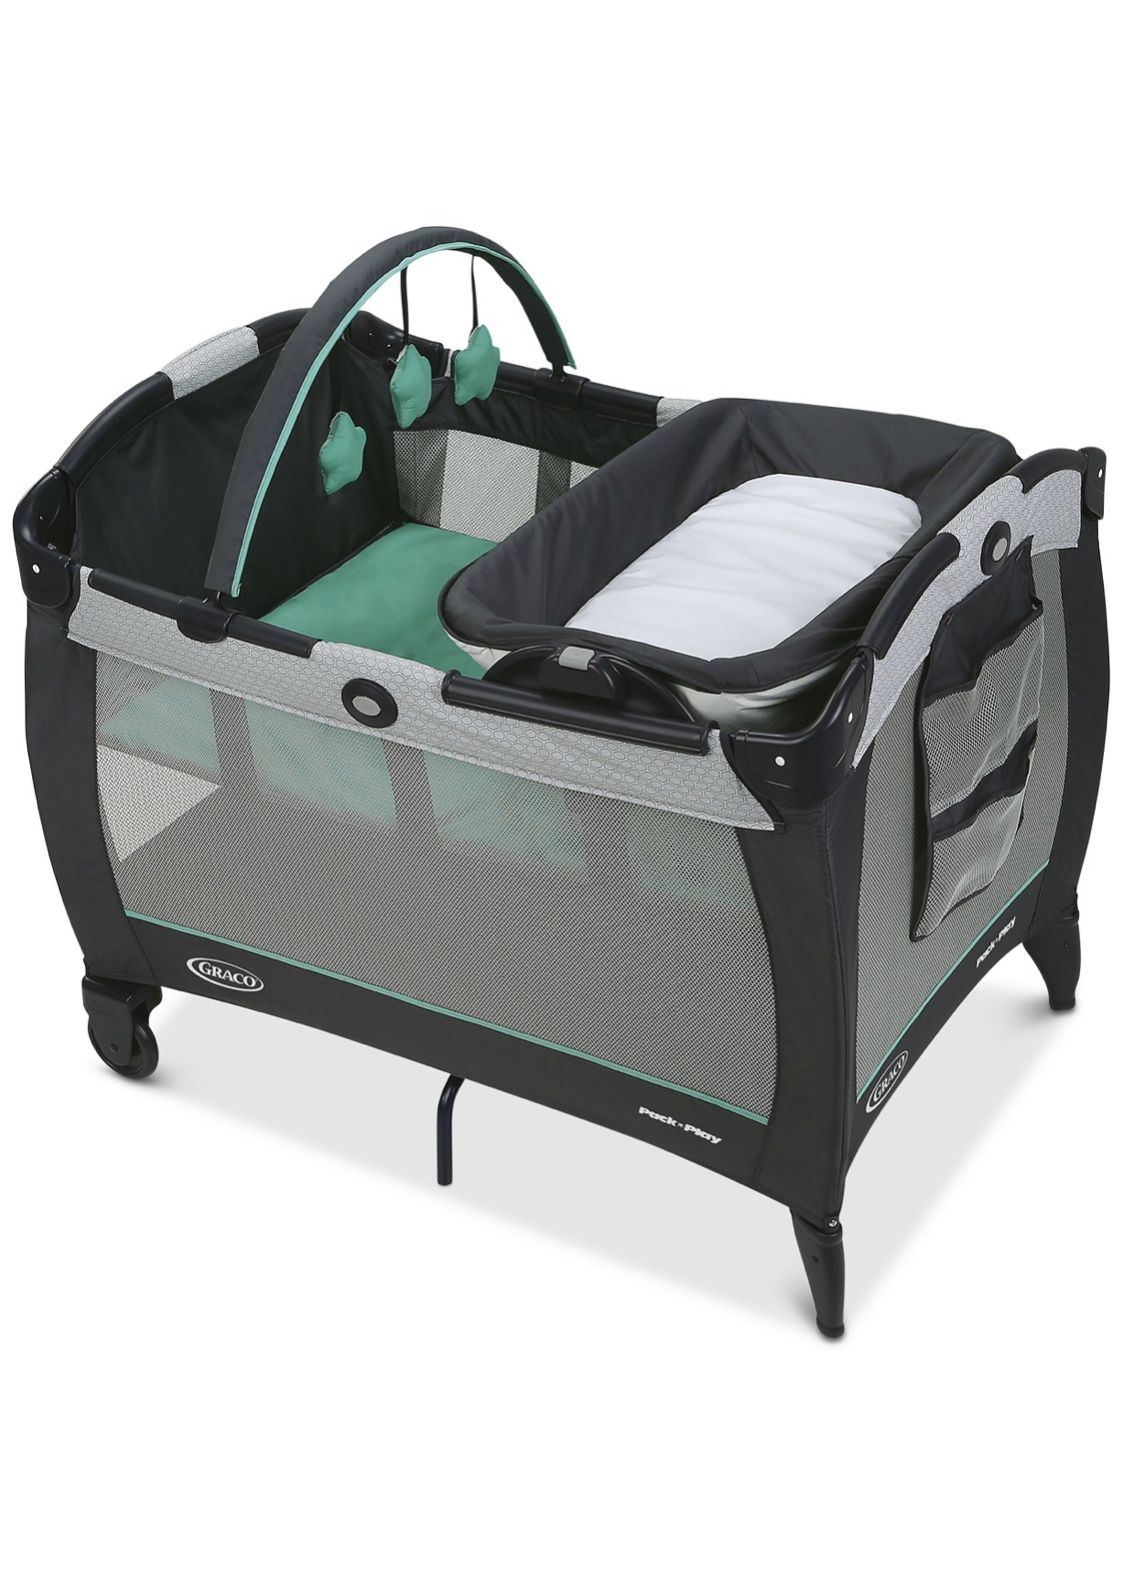 Graco baby playpen with changing table